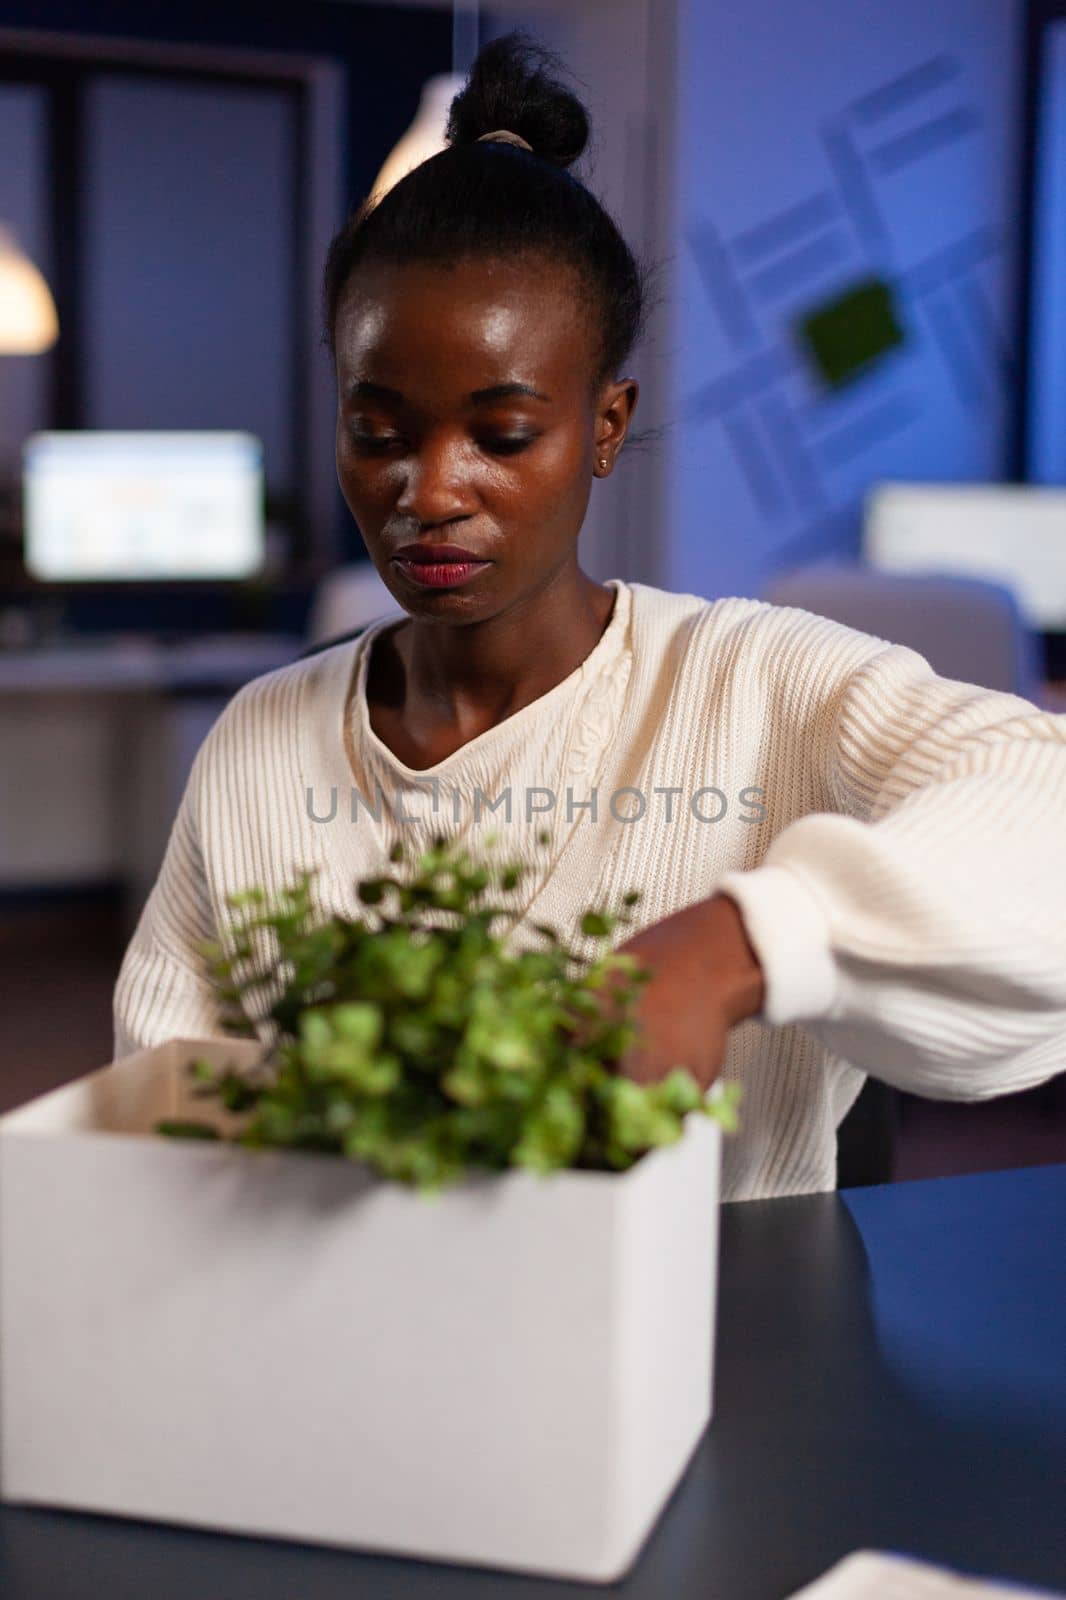 Relocated african american businesswoman putting objects in cardboard box after is fired late at night in startup company office. Resigned tired entrepreneur woman leaving communication job